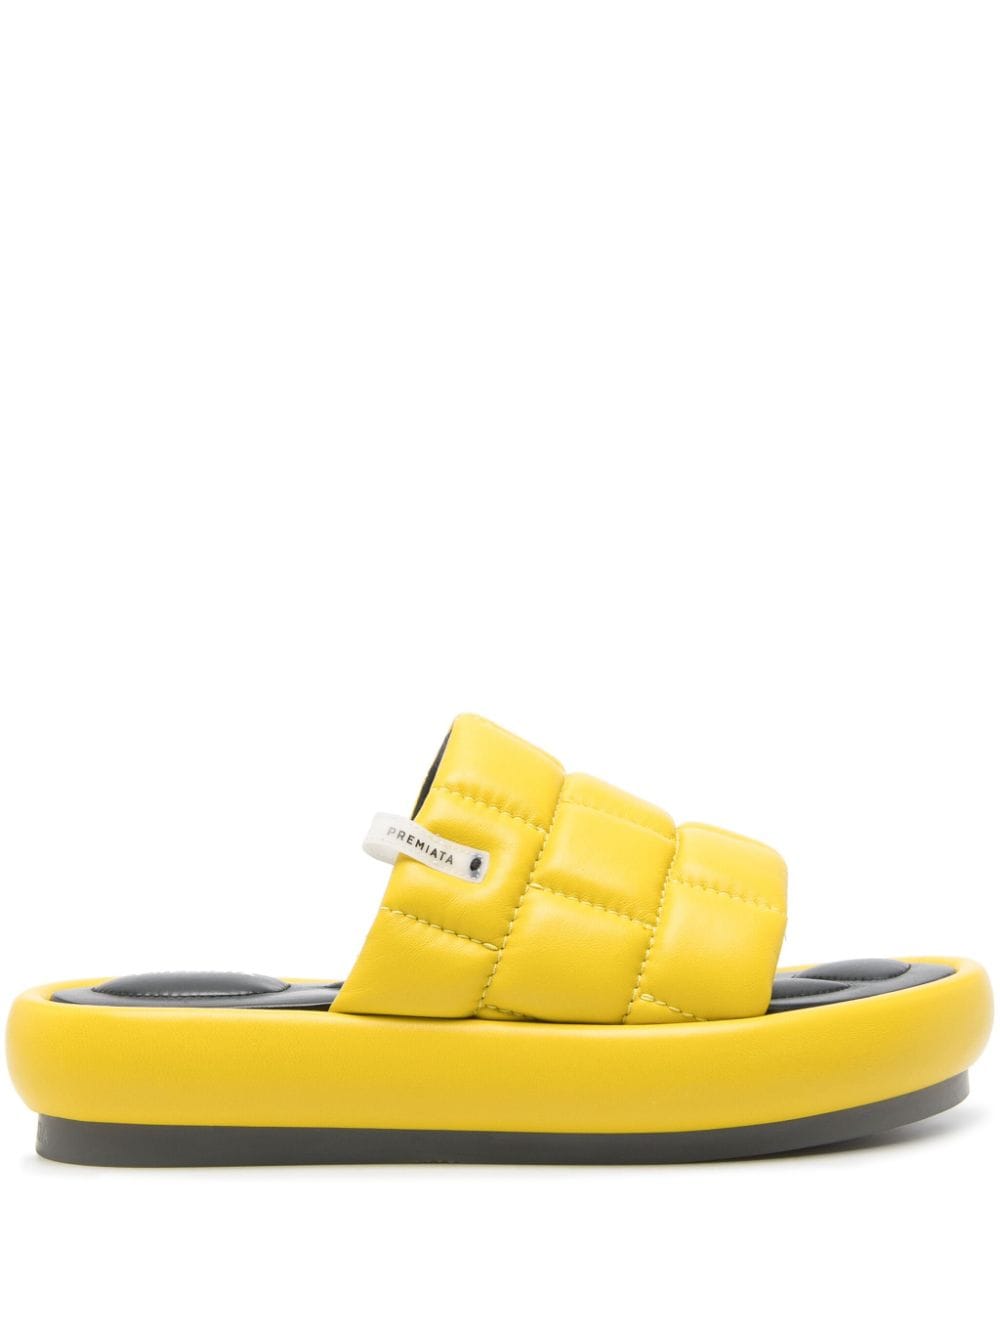 Premiata quilted leather slides - Giallo